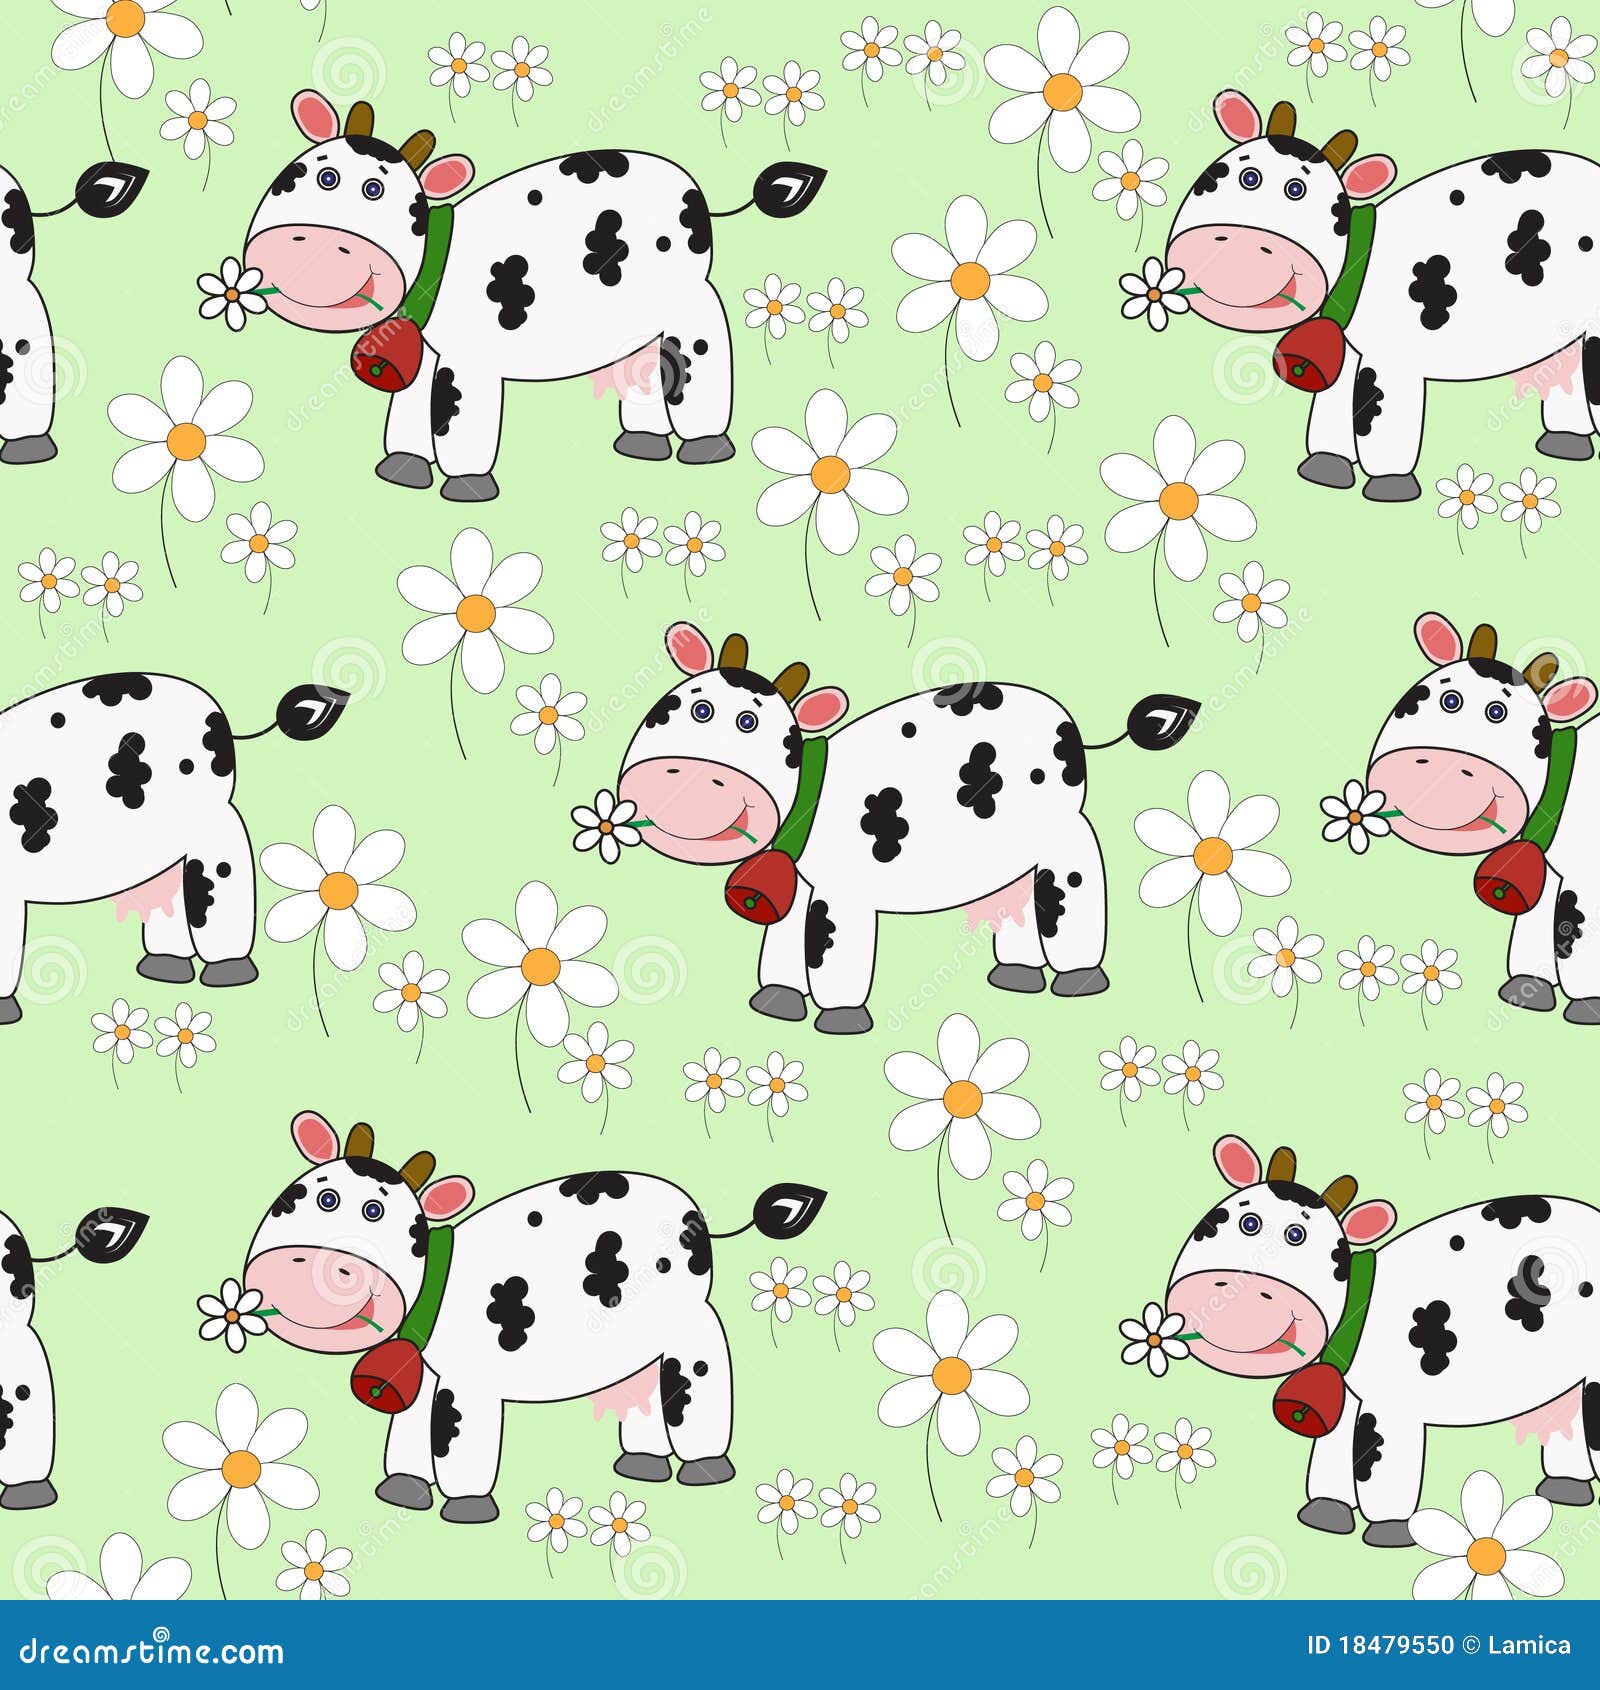 Seamless Cow Spots Pattern Cow Print Stock Illustration - Download